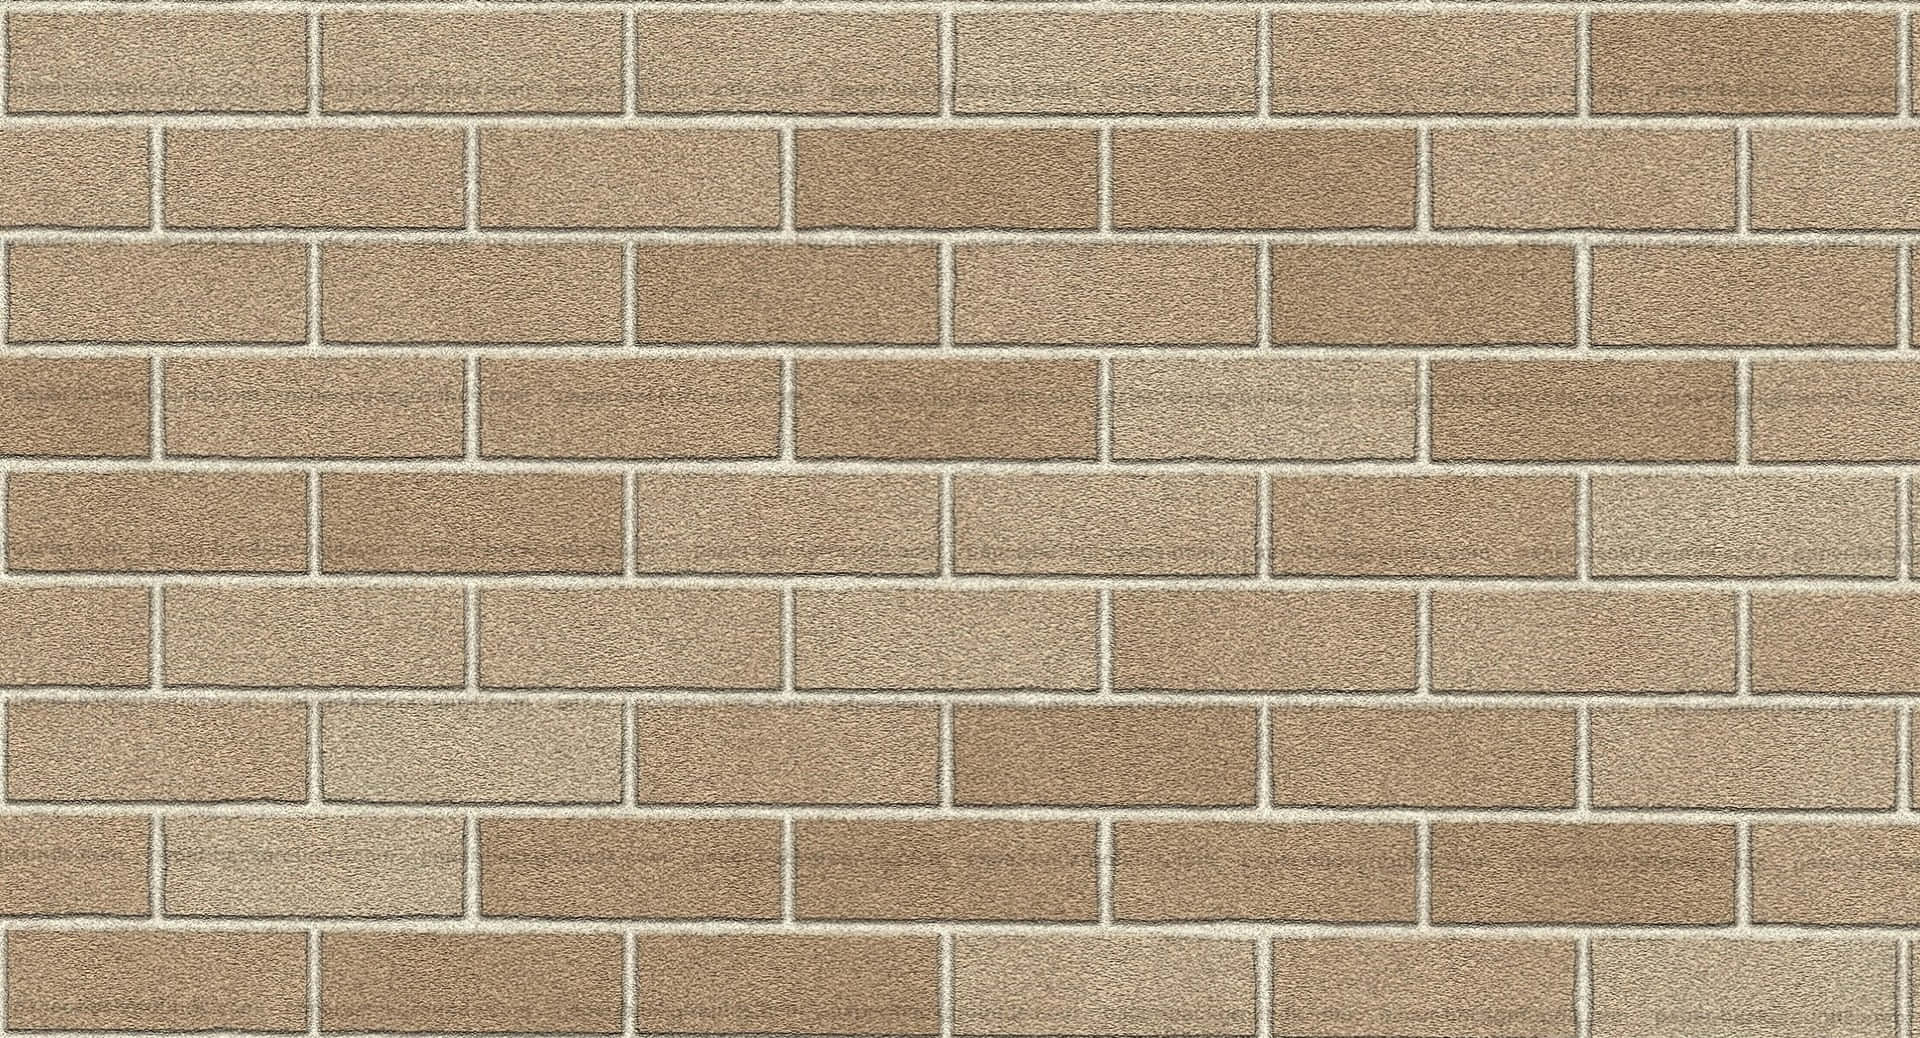 Detailed Brick Wall Texture Background